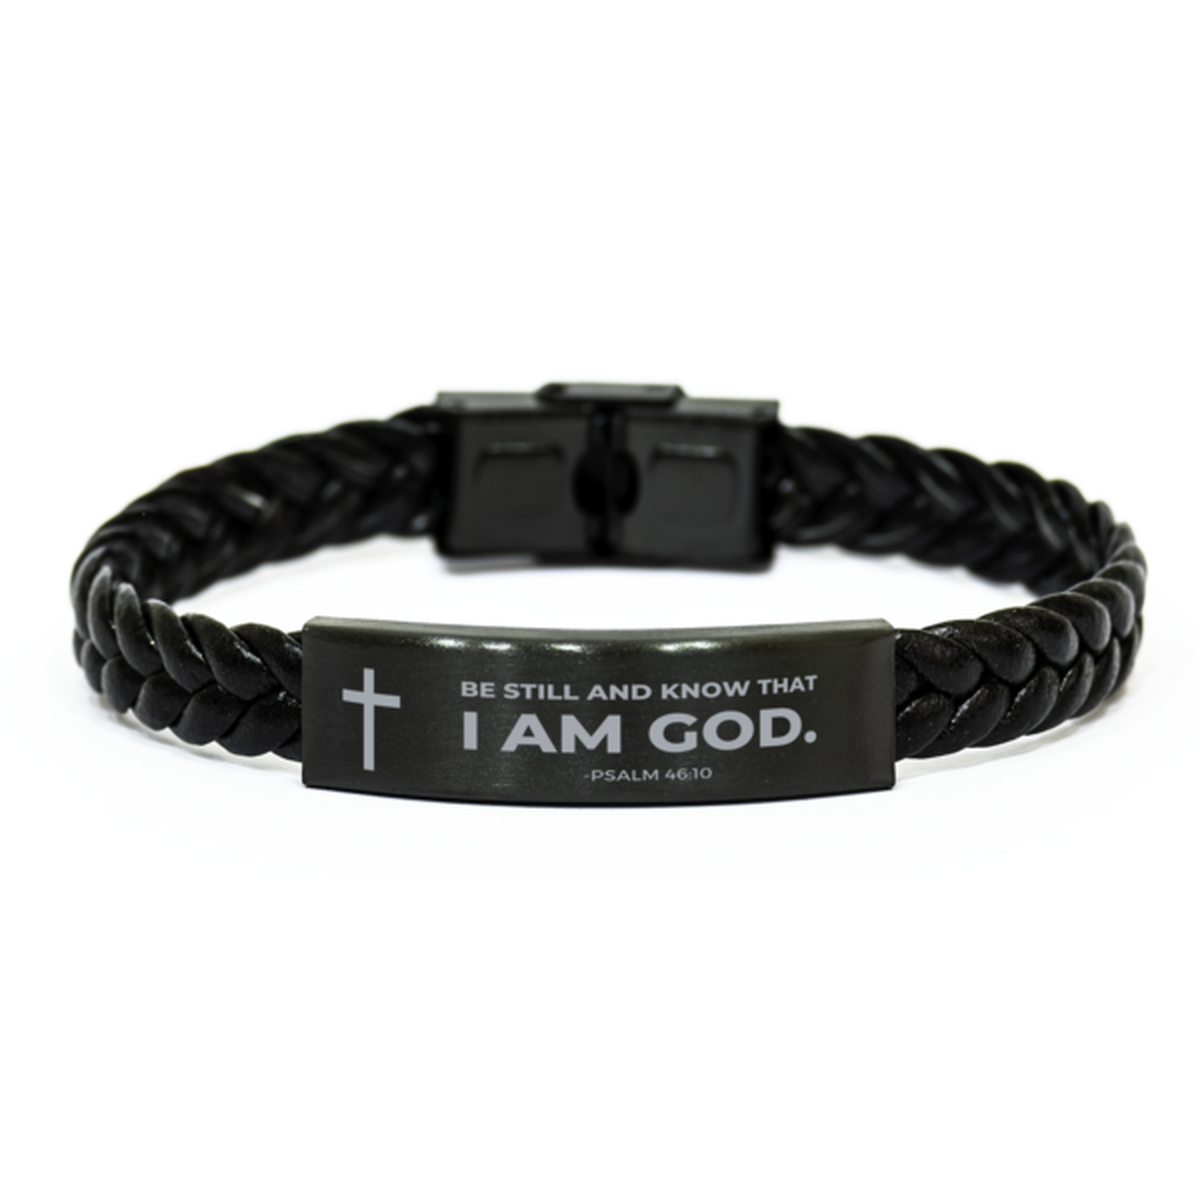 Baptism Gifts For Teenage Boys Girls, Christian Bible Verse Braided Leather Bracelet, Be still and know that I am god, Catholic Confirmation Gifts for Son, Godson, Grandson, Nephew